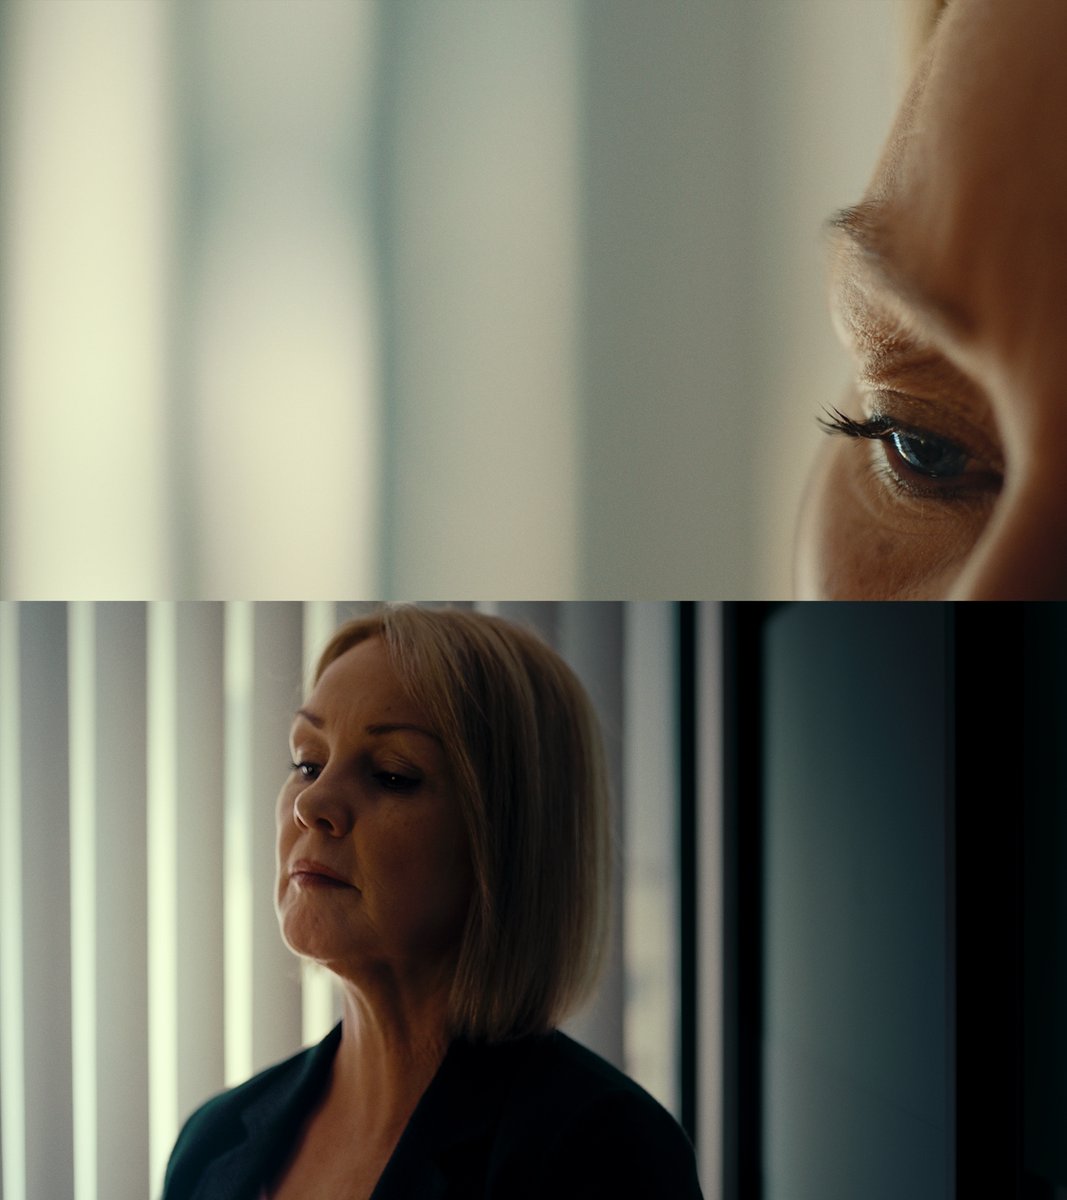 Some shots from our latest work 'The Prayer of the Brave'. #cinematography #film #production #advertising

Client: @AIBIreland 
Agency: @wearerothco
Director: @emerpreynolds
Director of Photography: Kate McCullough
Production Company: @AntidoteFilms
Post-house: Outer Limits